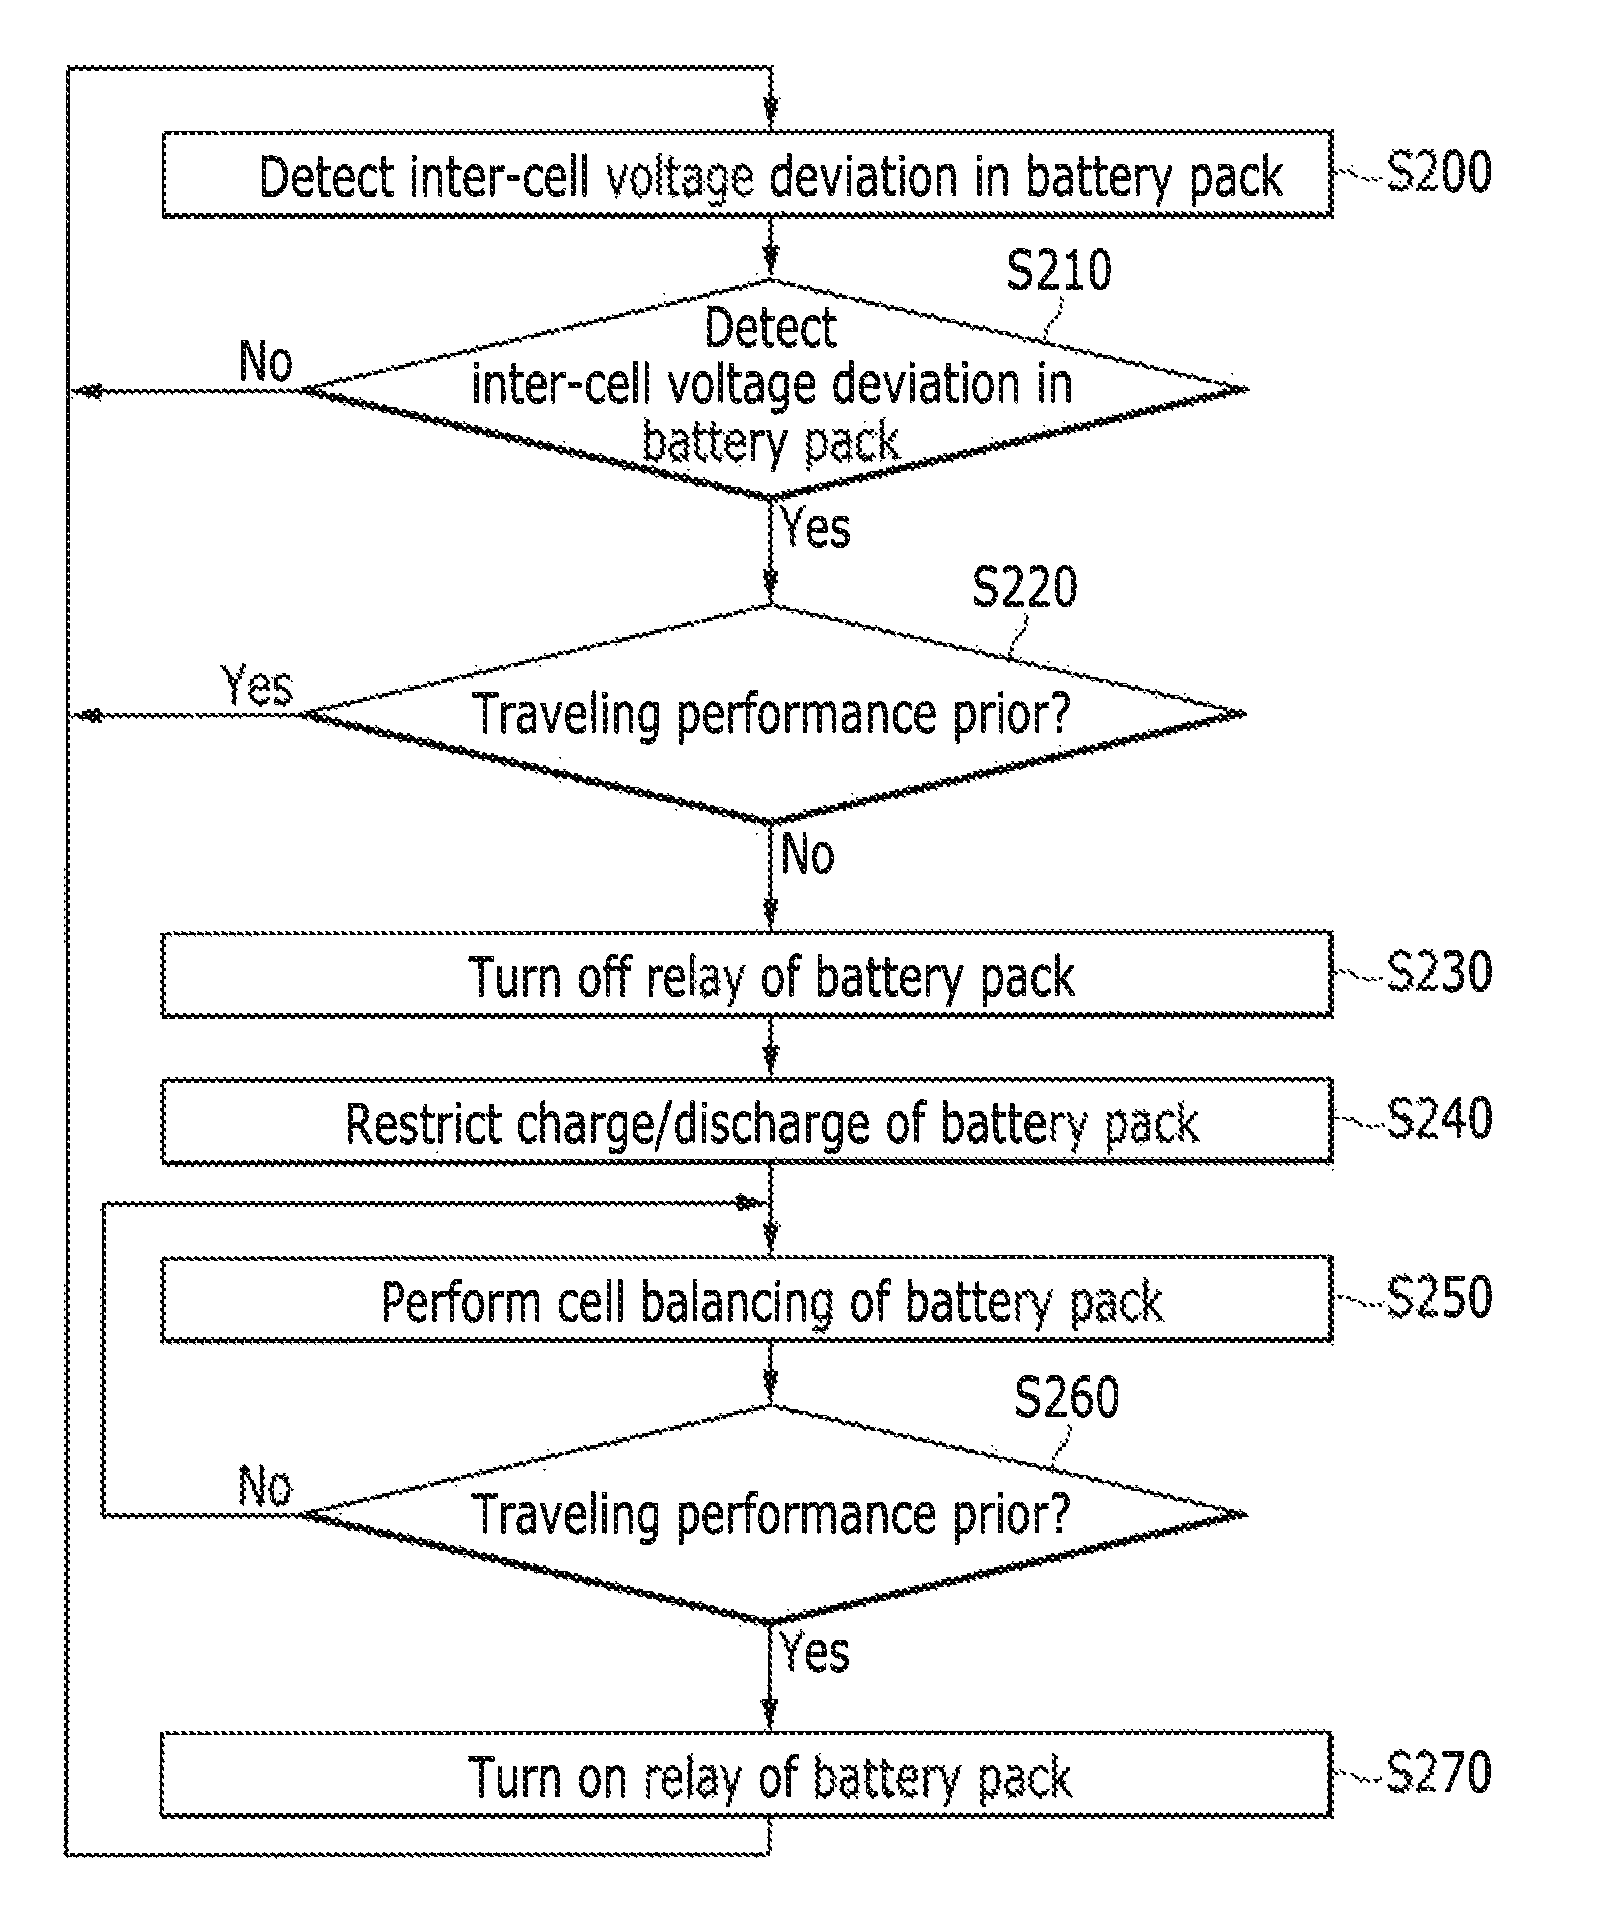 System and method for cell balancing of battery pack